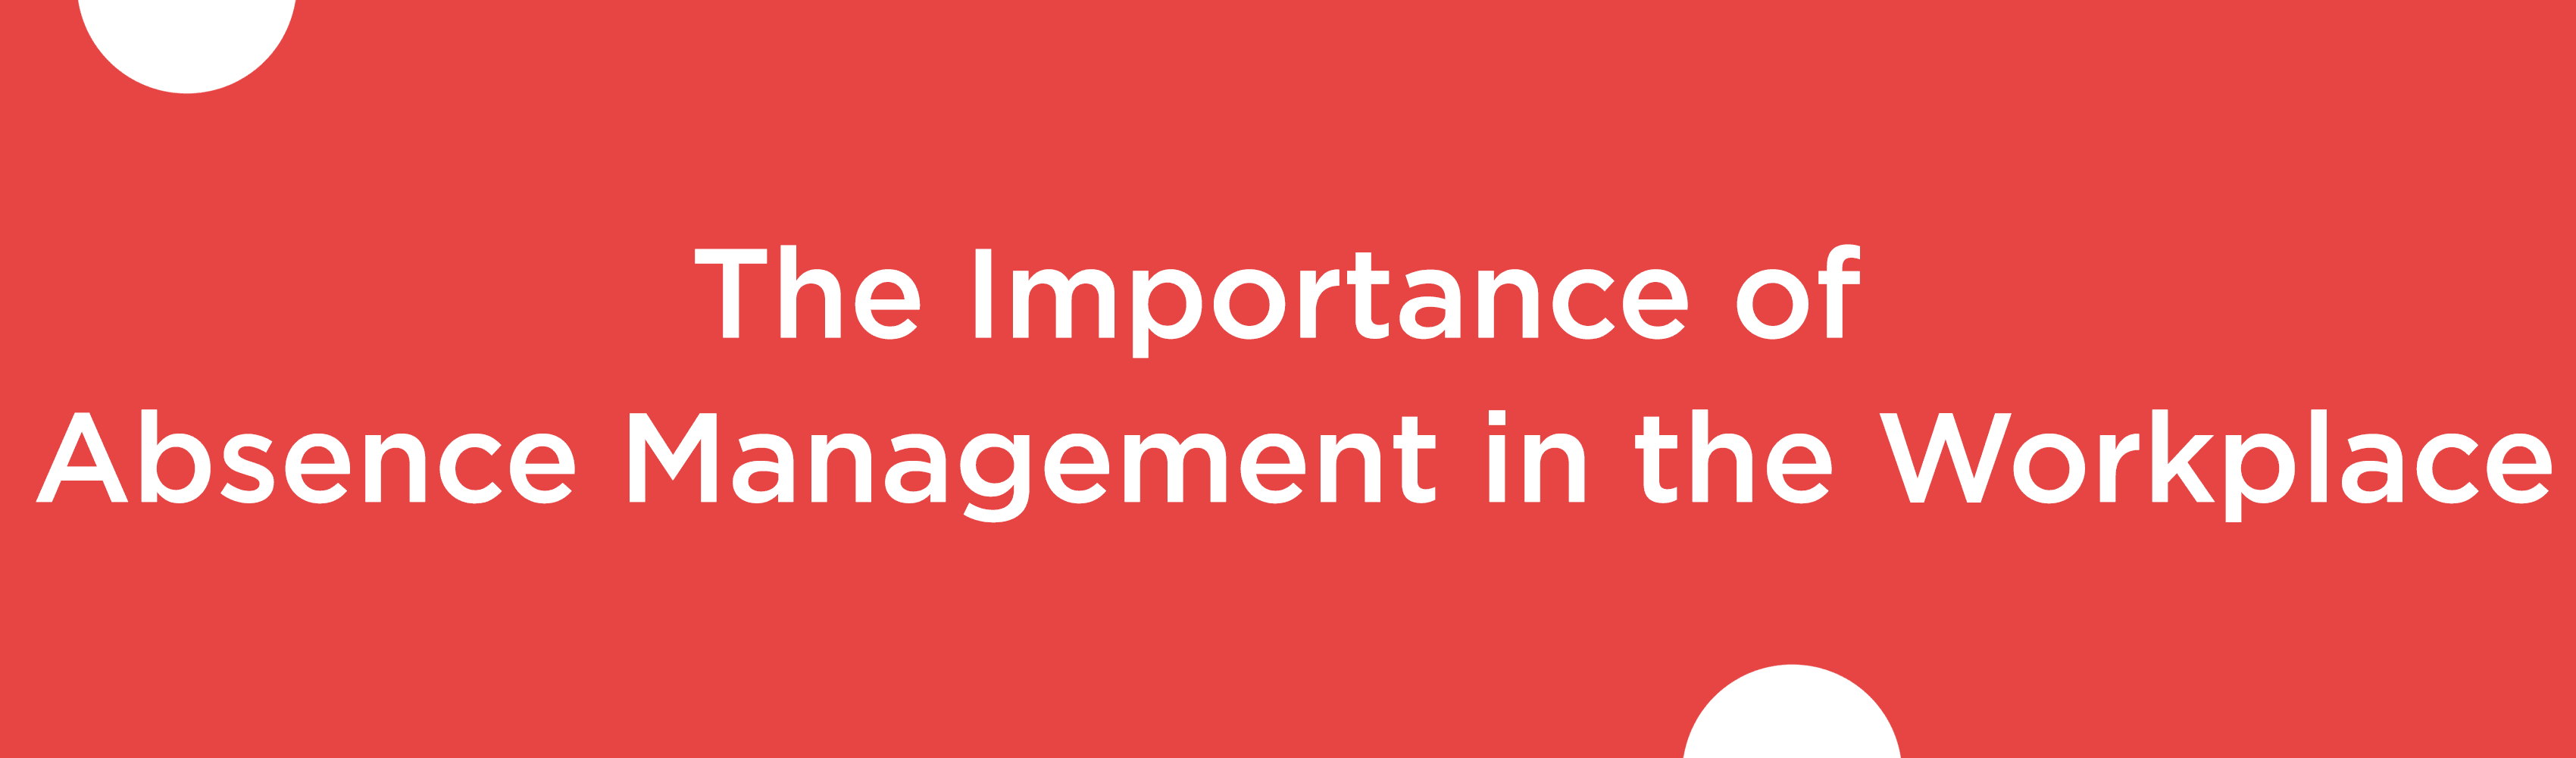 The Importance of Absence Management in the Workplace